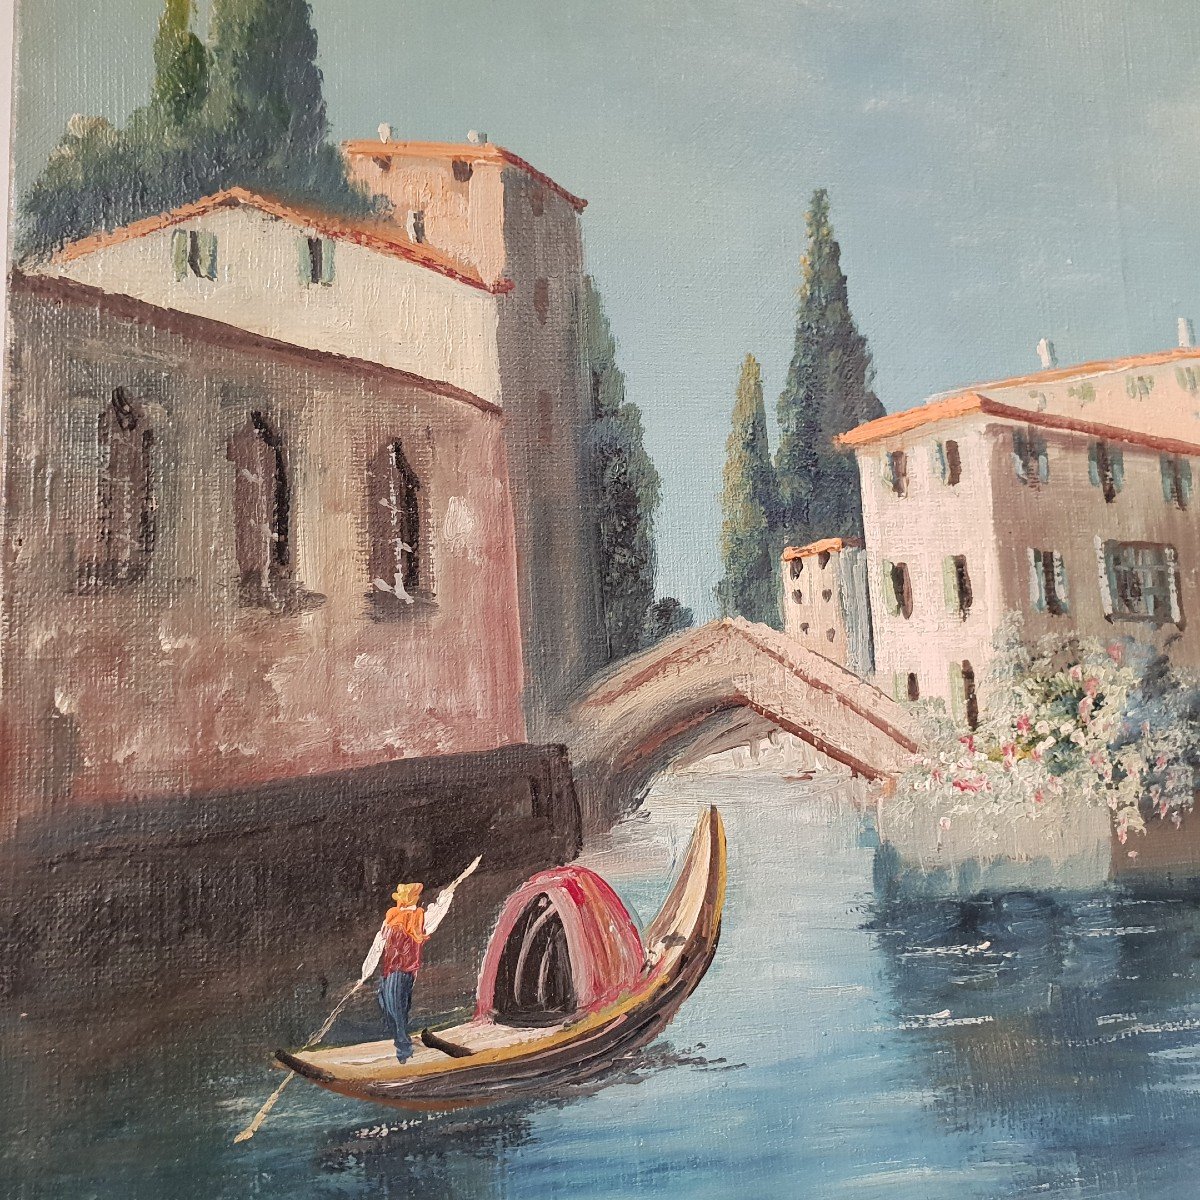 Painting Hst Scene Gondola In Venice Signed Andrey-photo-1